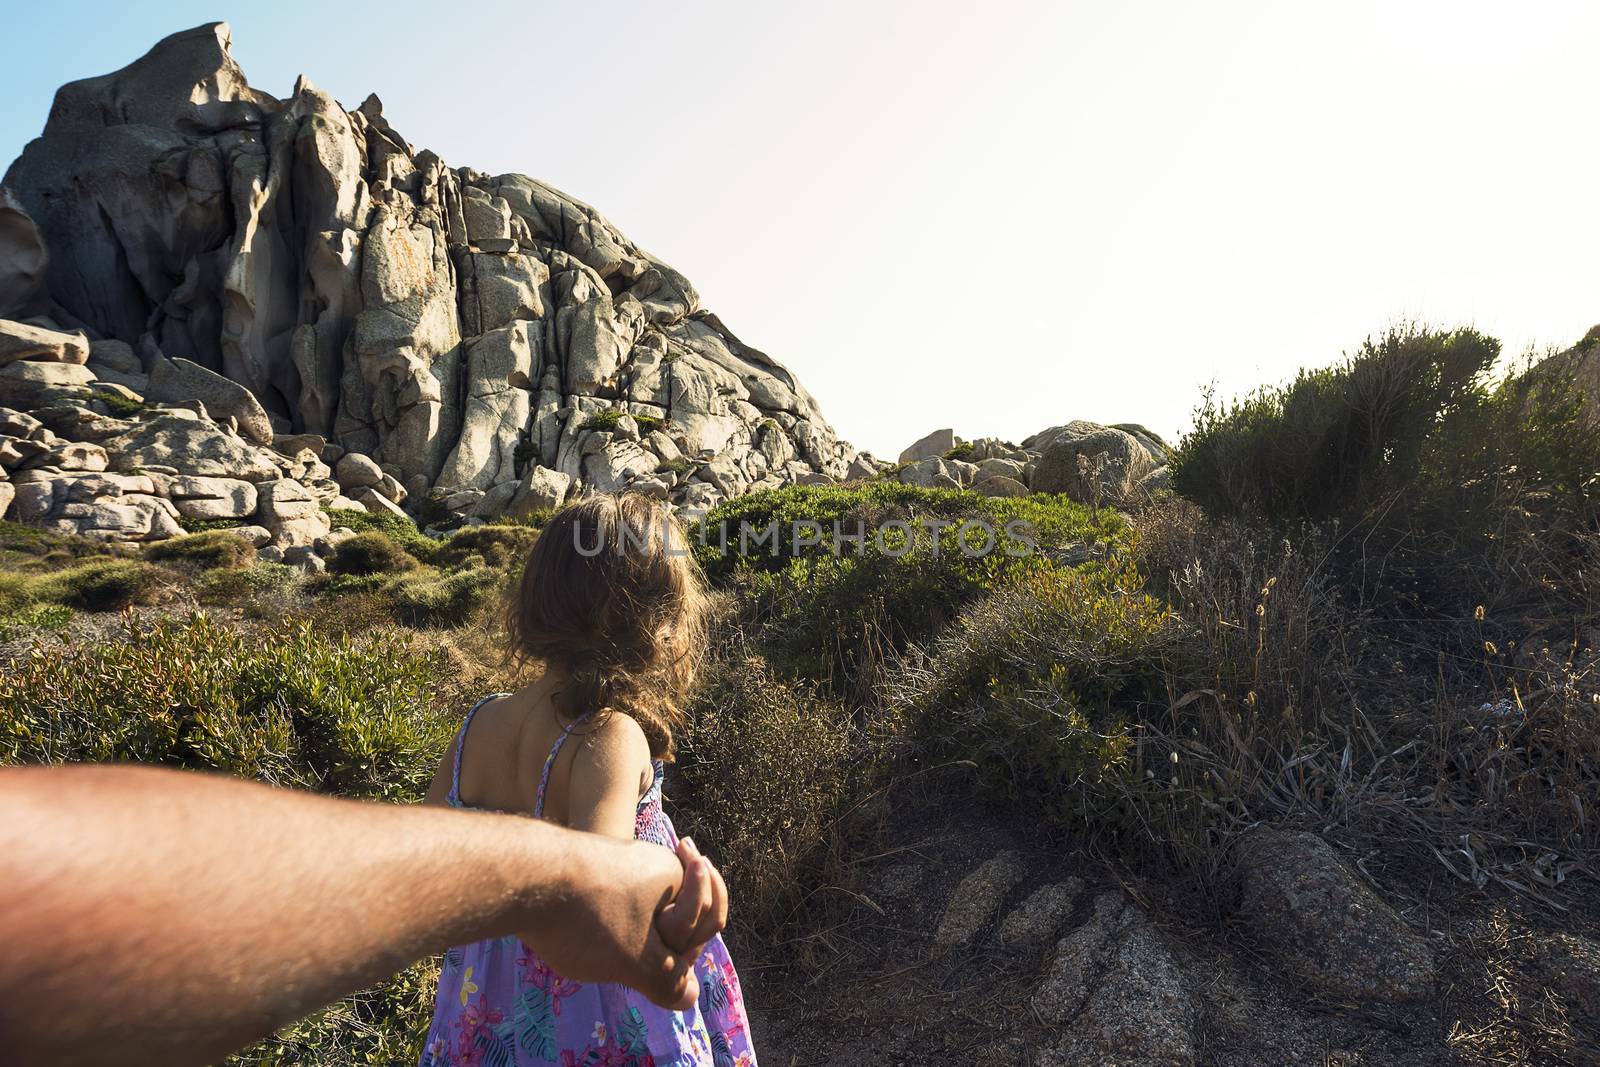 Kid strolling through the bushes holding her father's hand, in the background there are rocky mountains and the sky shines clear, subjective shot, Capo Testa, Santa Teresa di Gallura, Sardinia, Italy